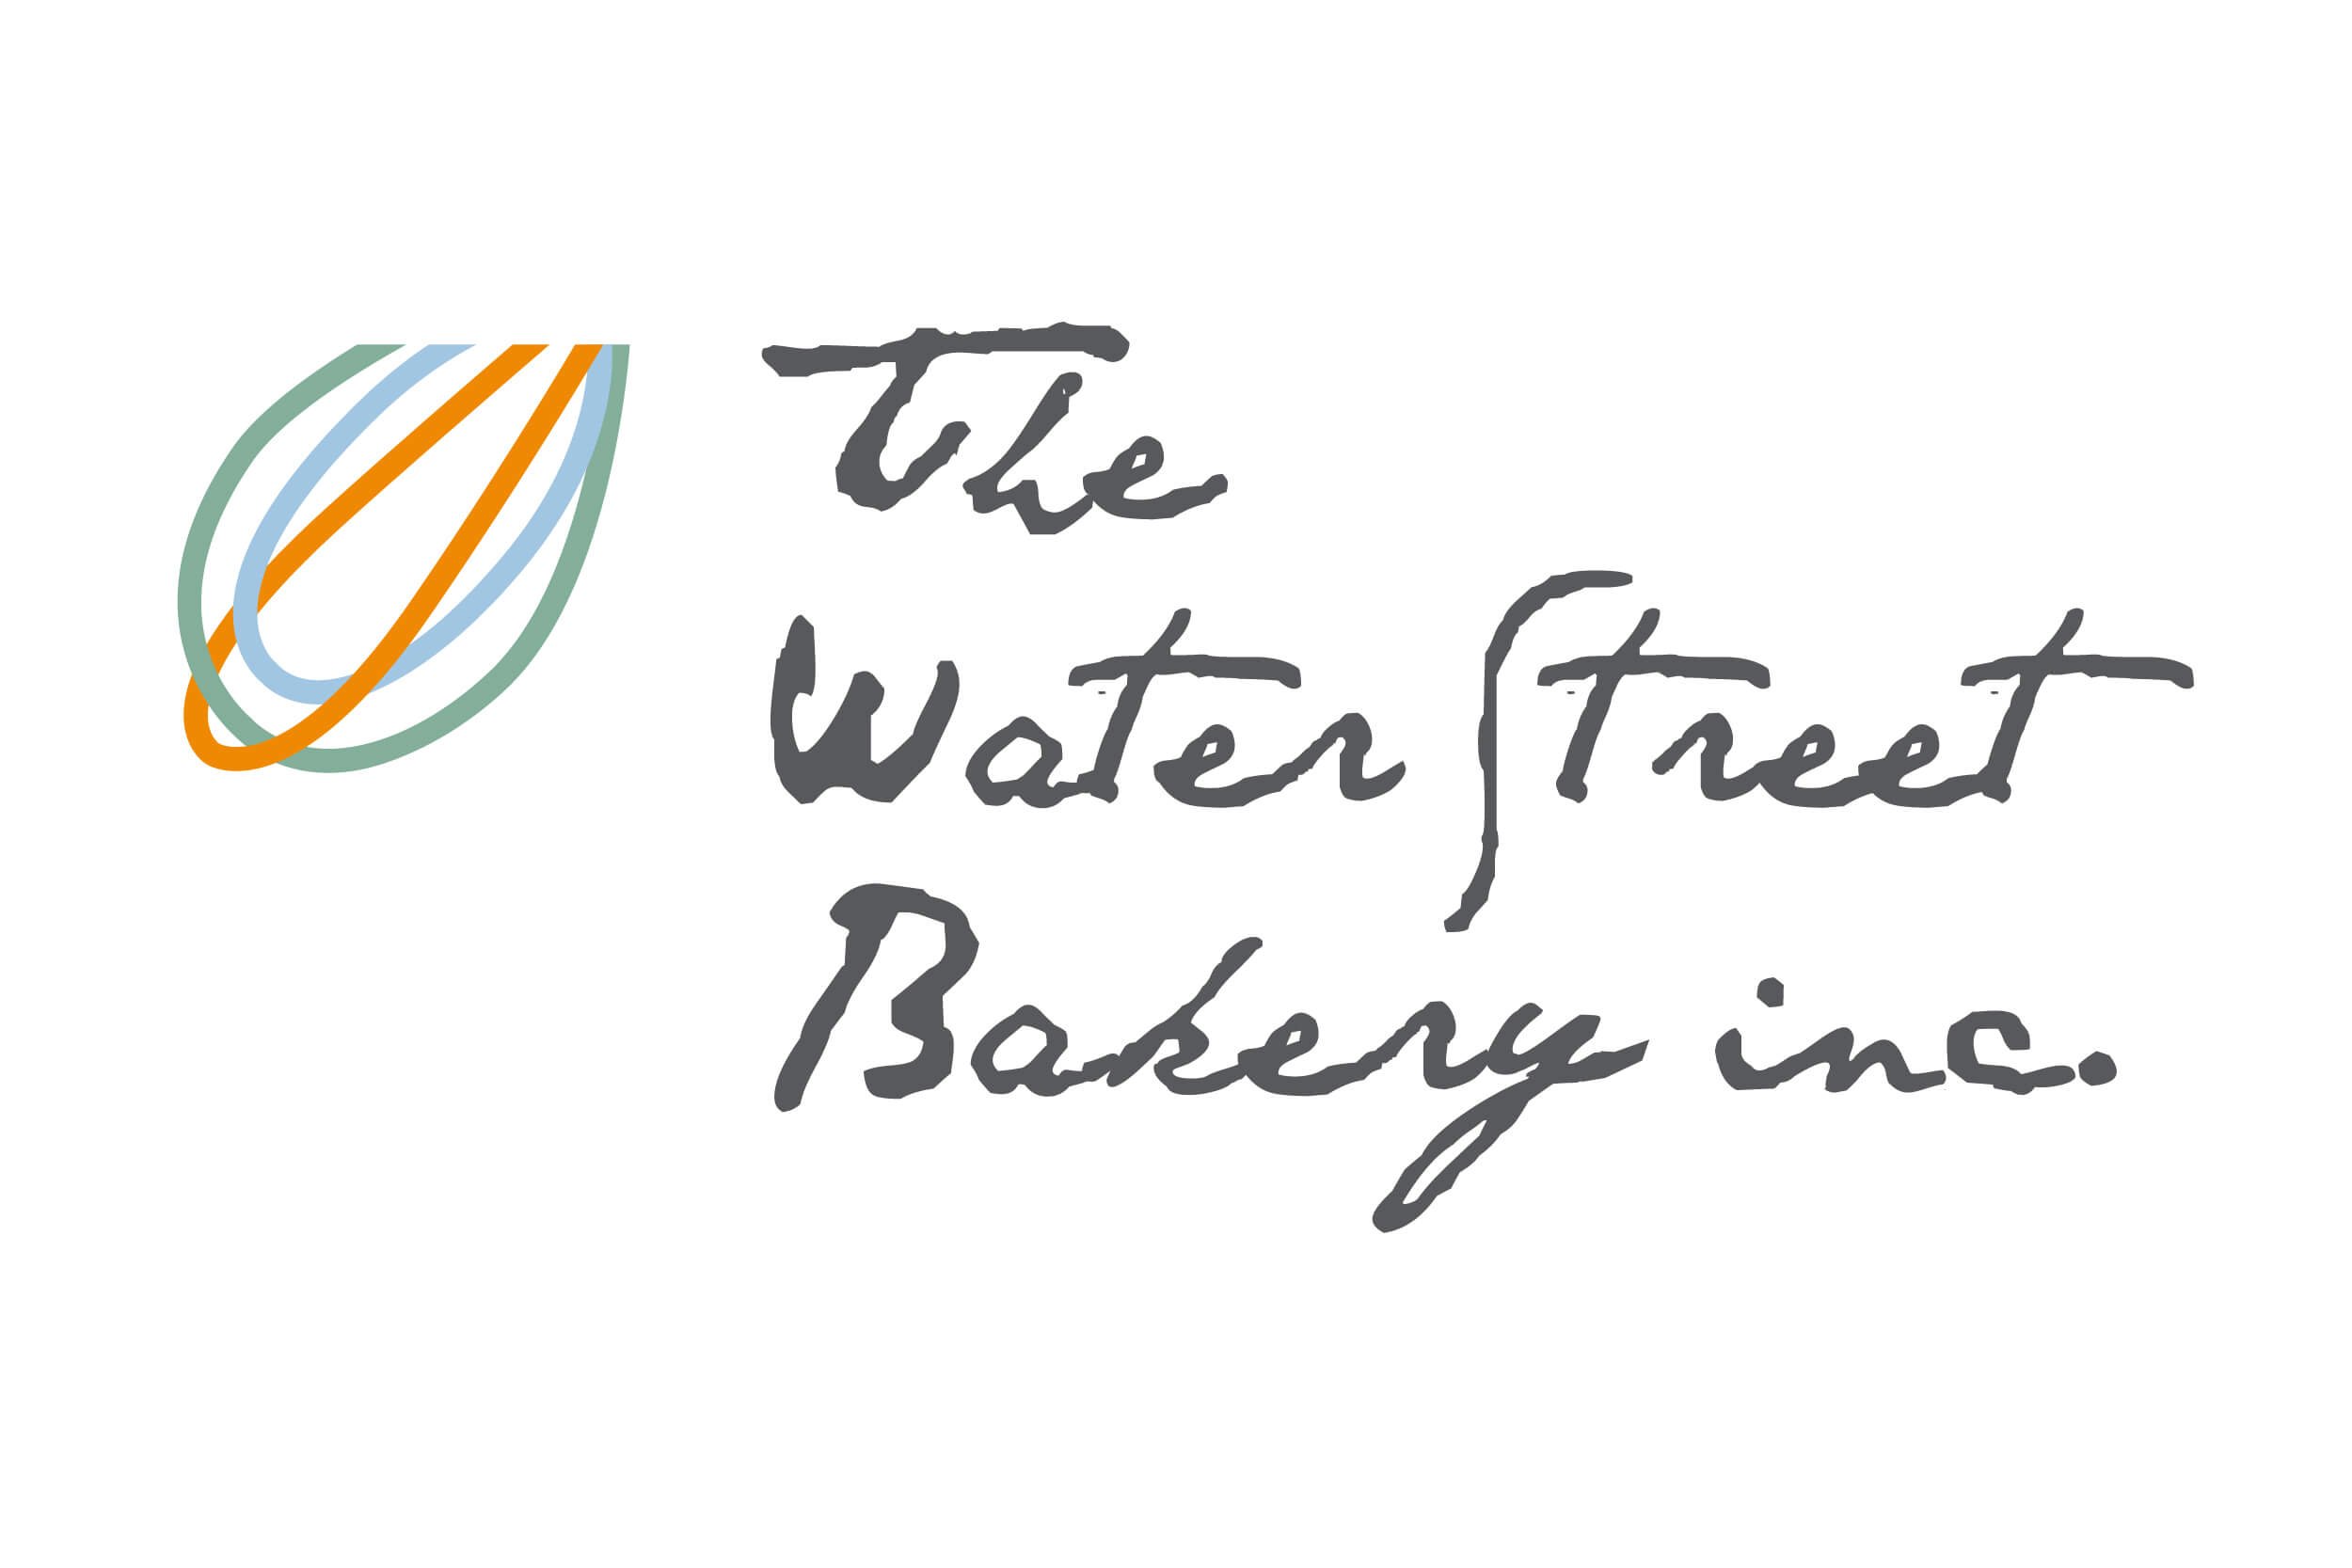 More about the bakery's brand identity  ›